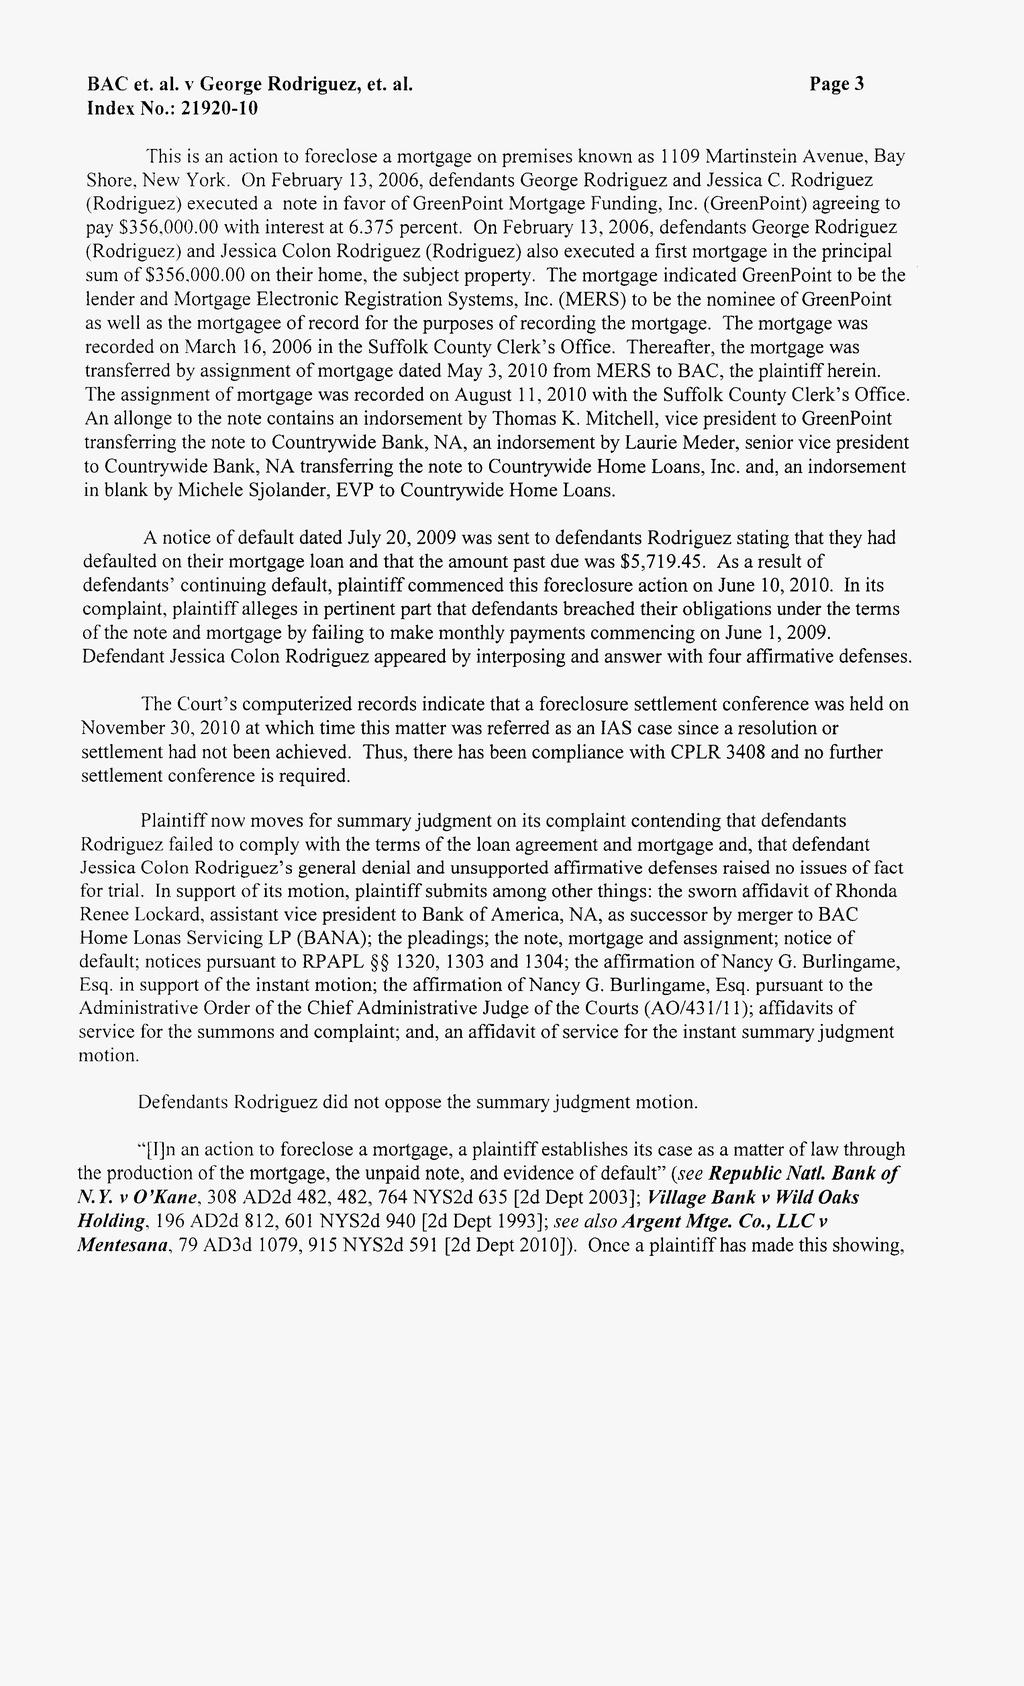 [* 3] Page 3 This is an action to foreclose a mortgage on premises known as 1 109 Martinstein Avenue, Bay Shore. New York. On February 13, 2006, defendants George Rodriguez and Jessica C.